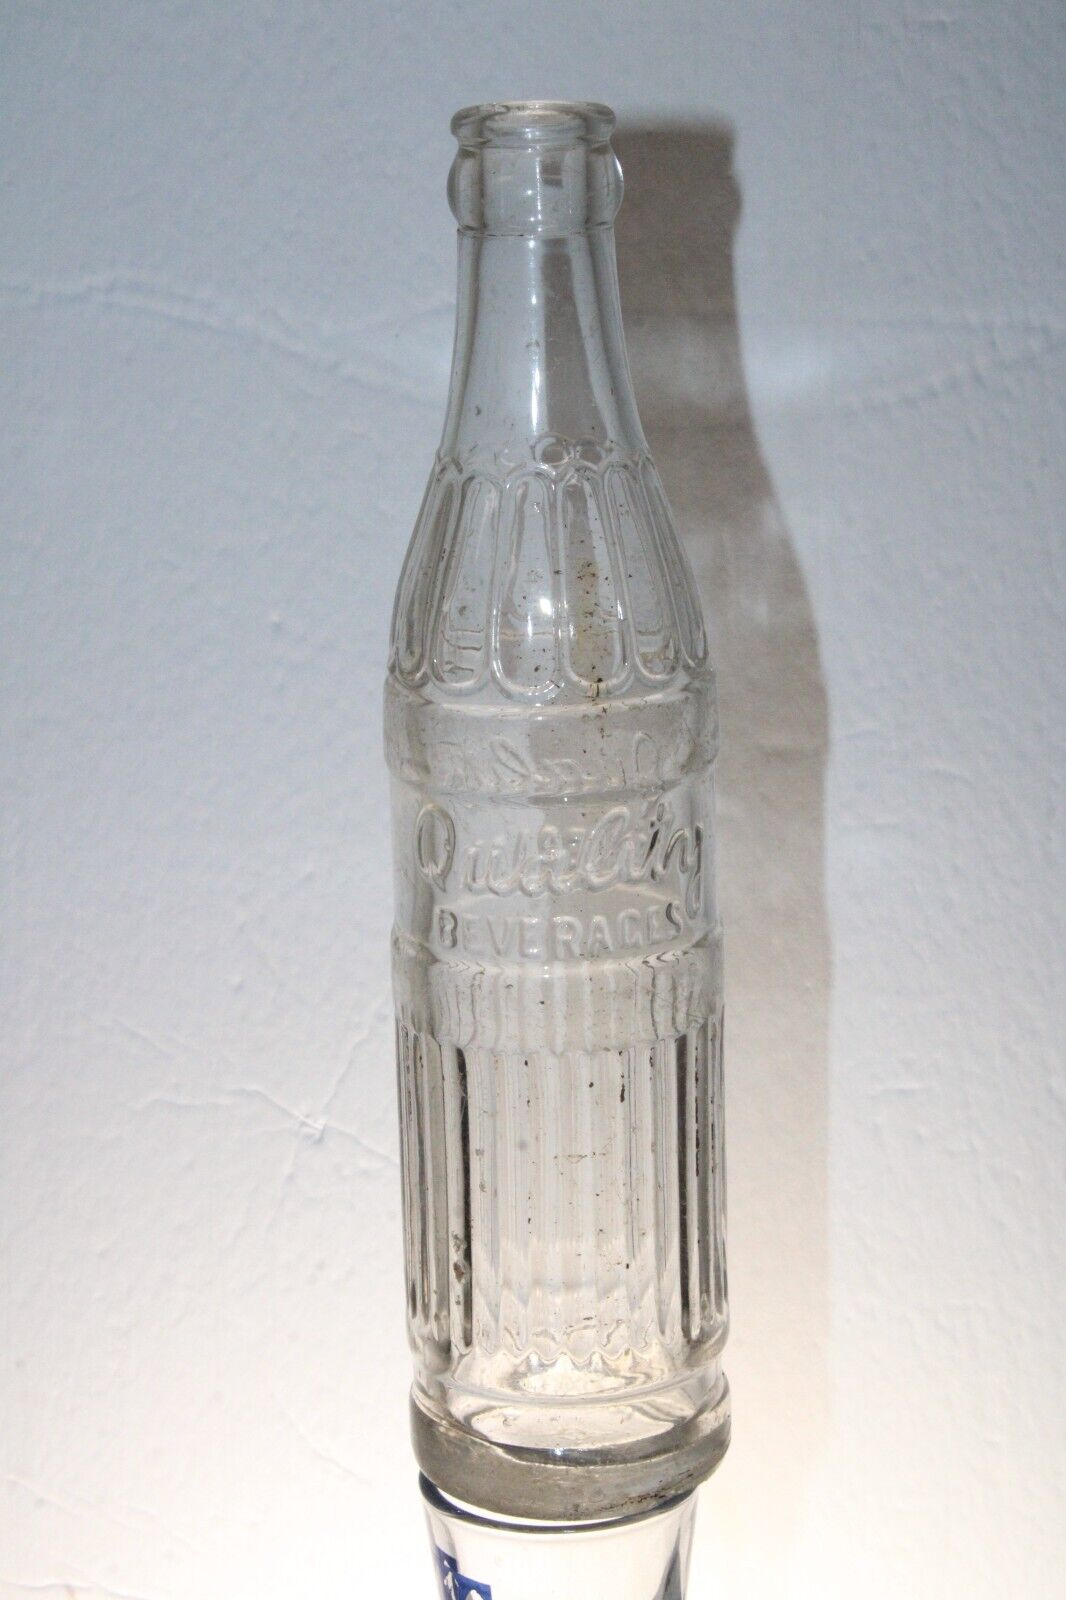 ATMORE ALA PIPIN BEVERAGES SODA BOTTLE SCARCE